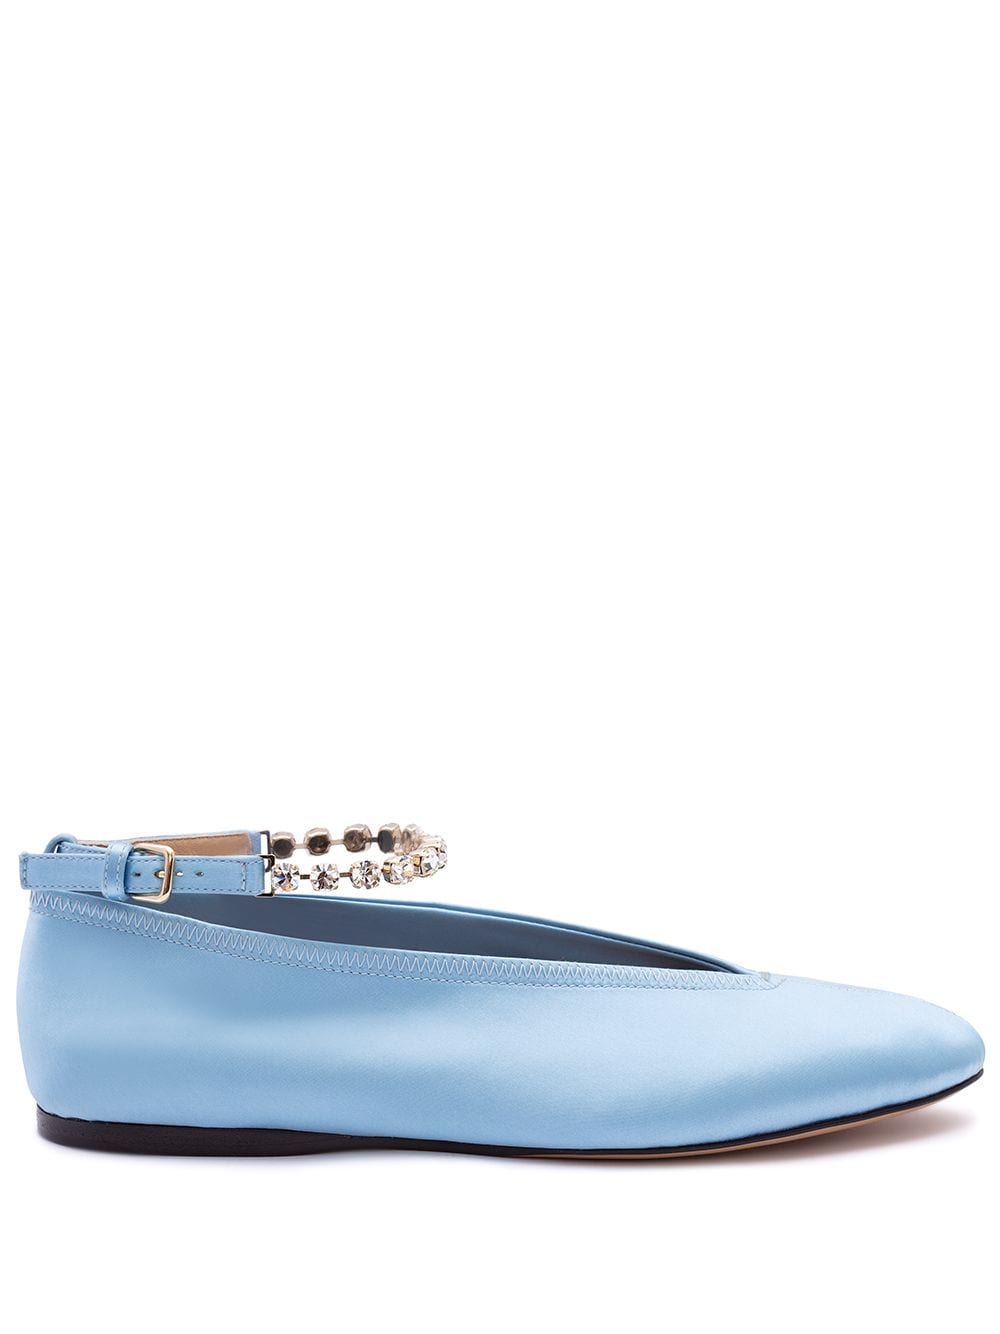 JW Anderson crystal ballerina shoes - Blue